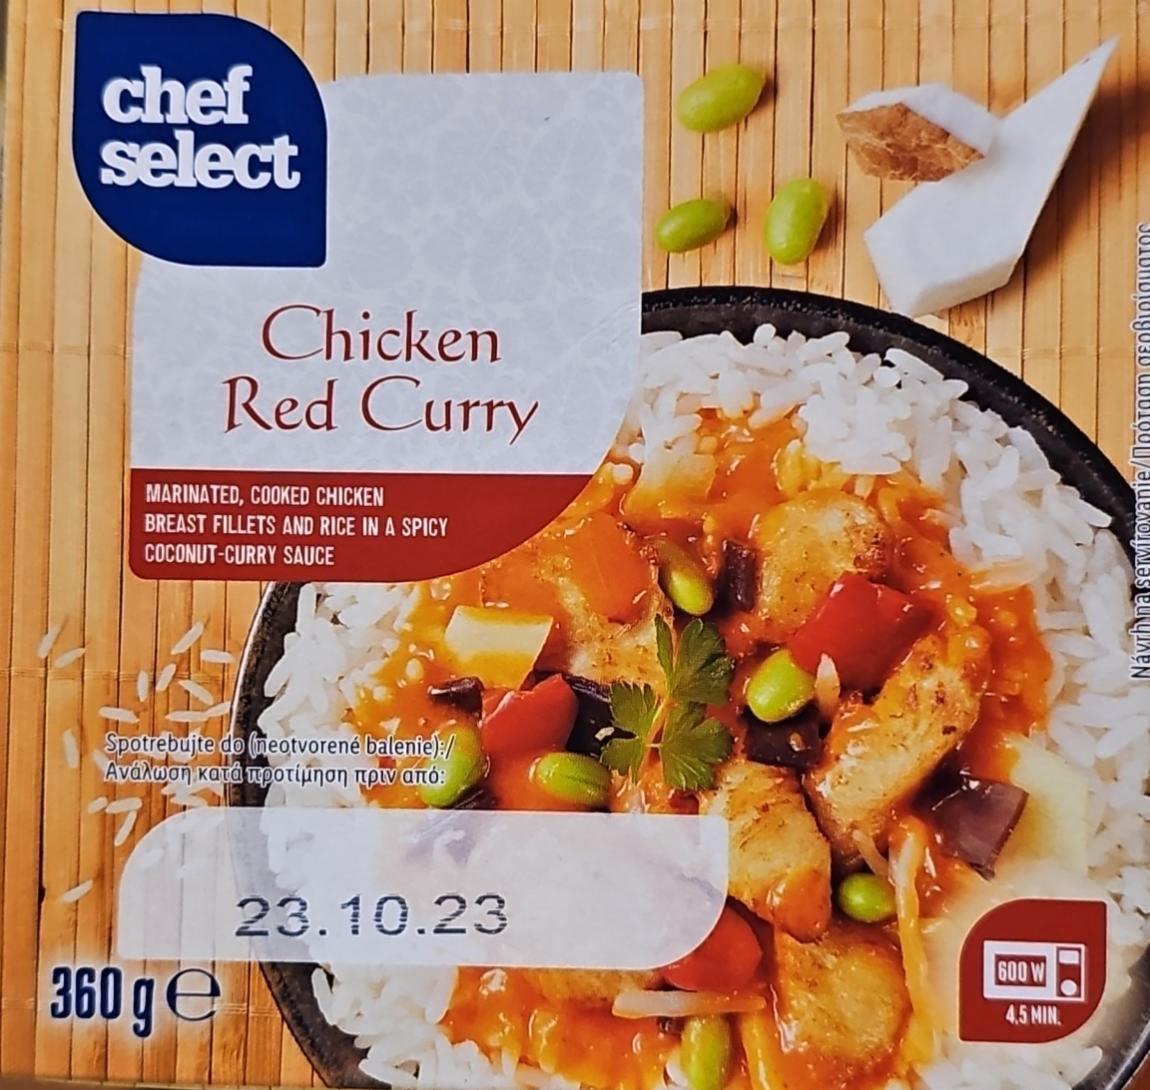 Képek - Chicken red curry Chef select